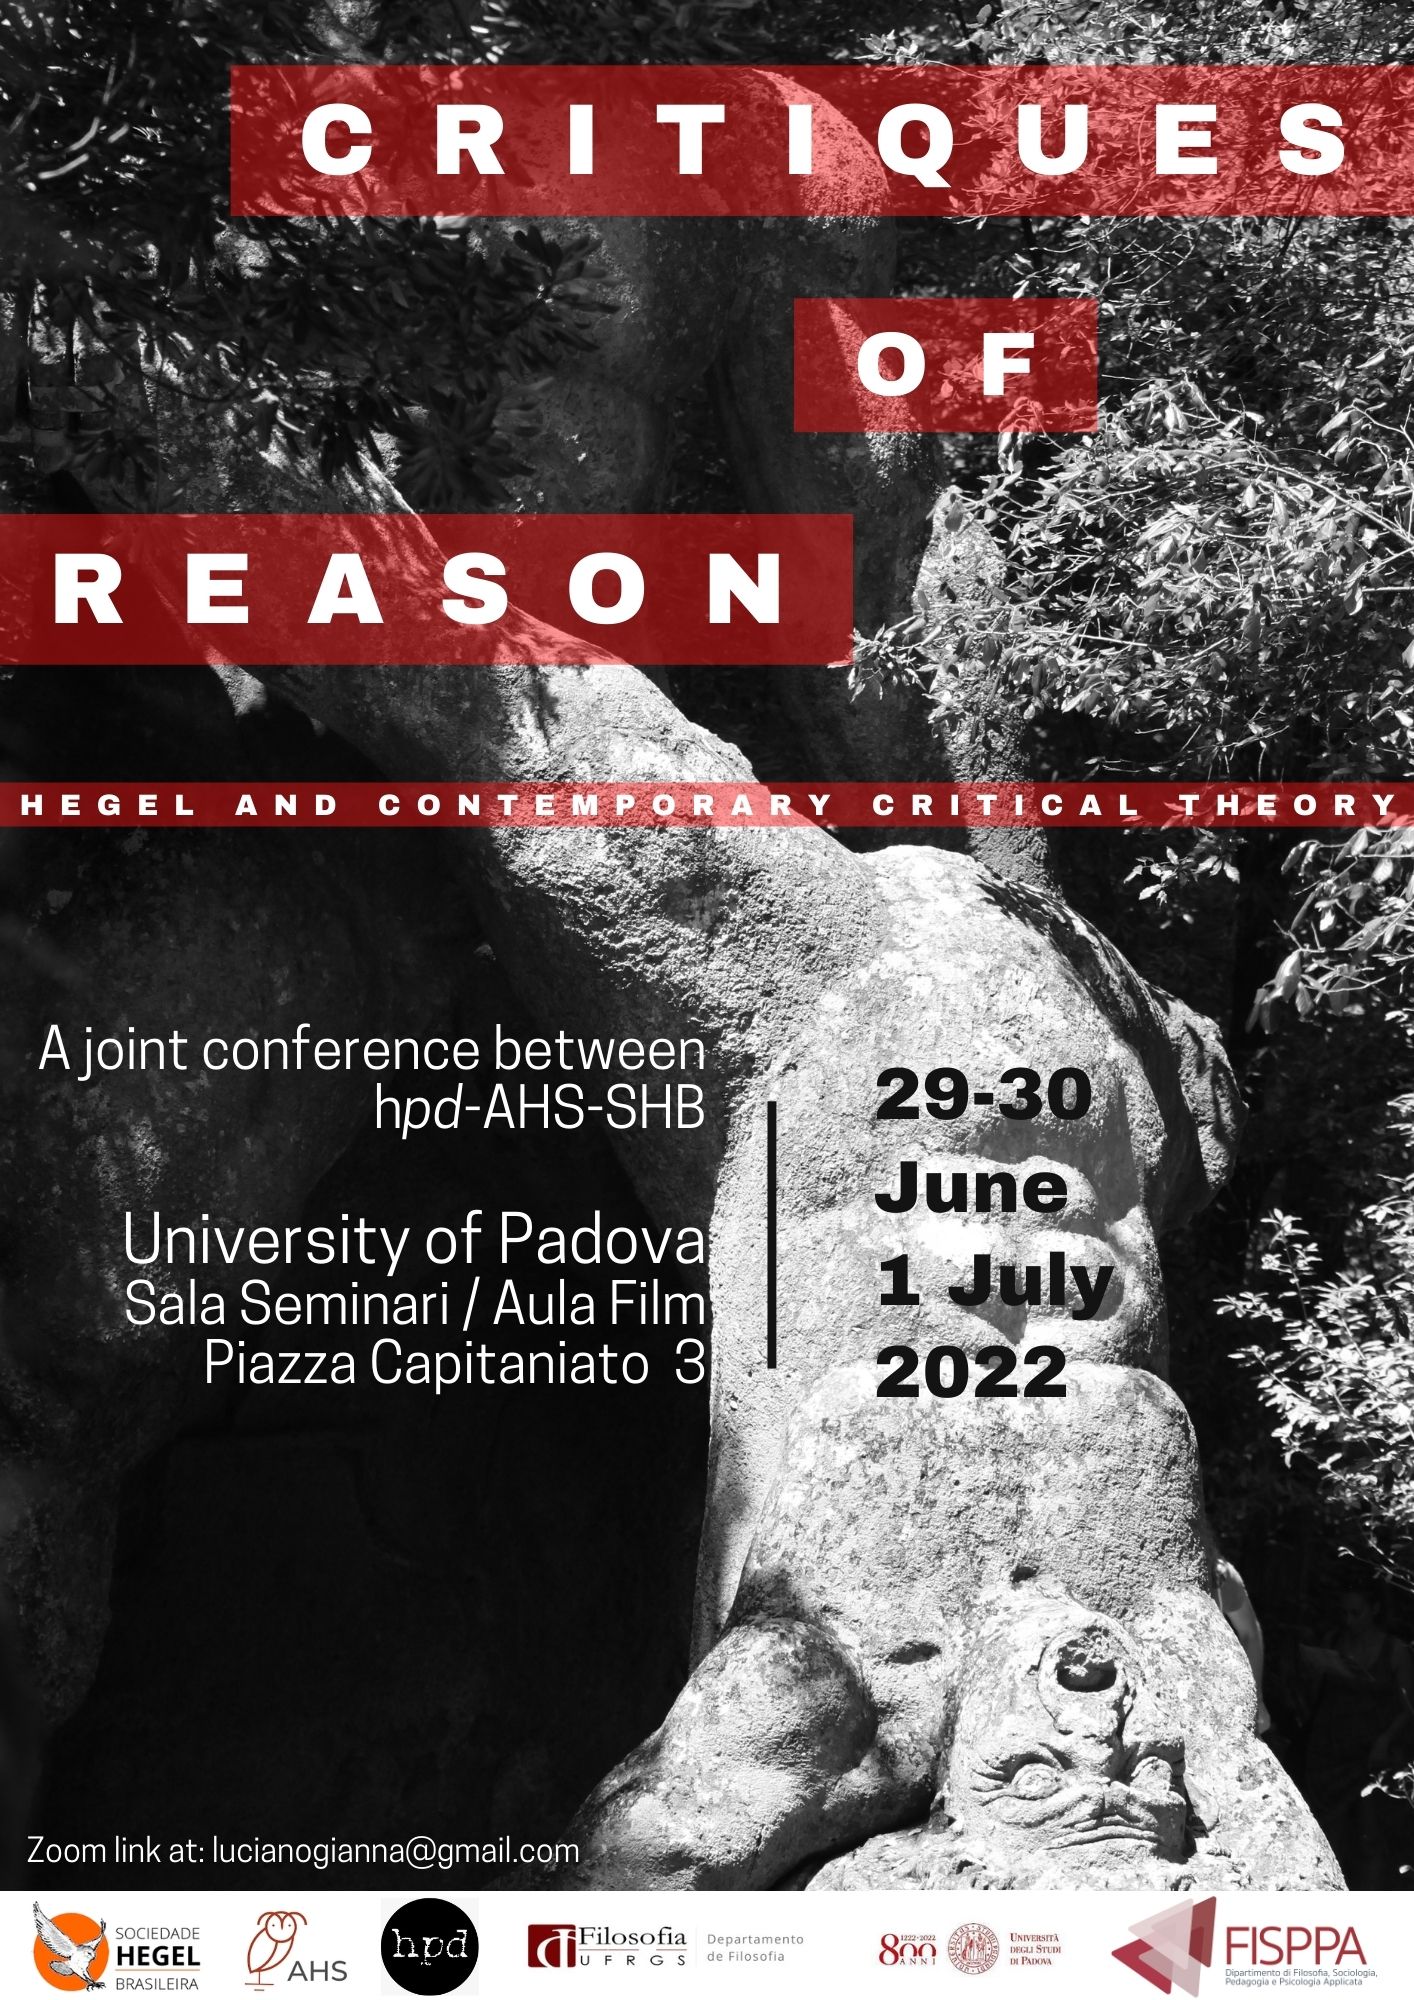 hpd-AHS-SHB Conference: “Critiques of Reason: Hegel and Contemporary Critical Theory” (Padova and online, June 29-30 / July 01, 2022)